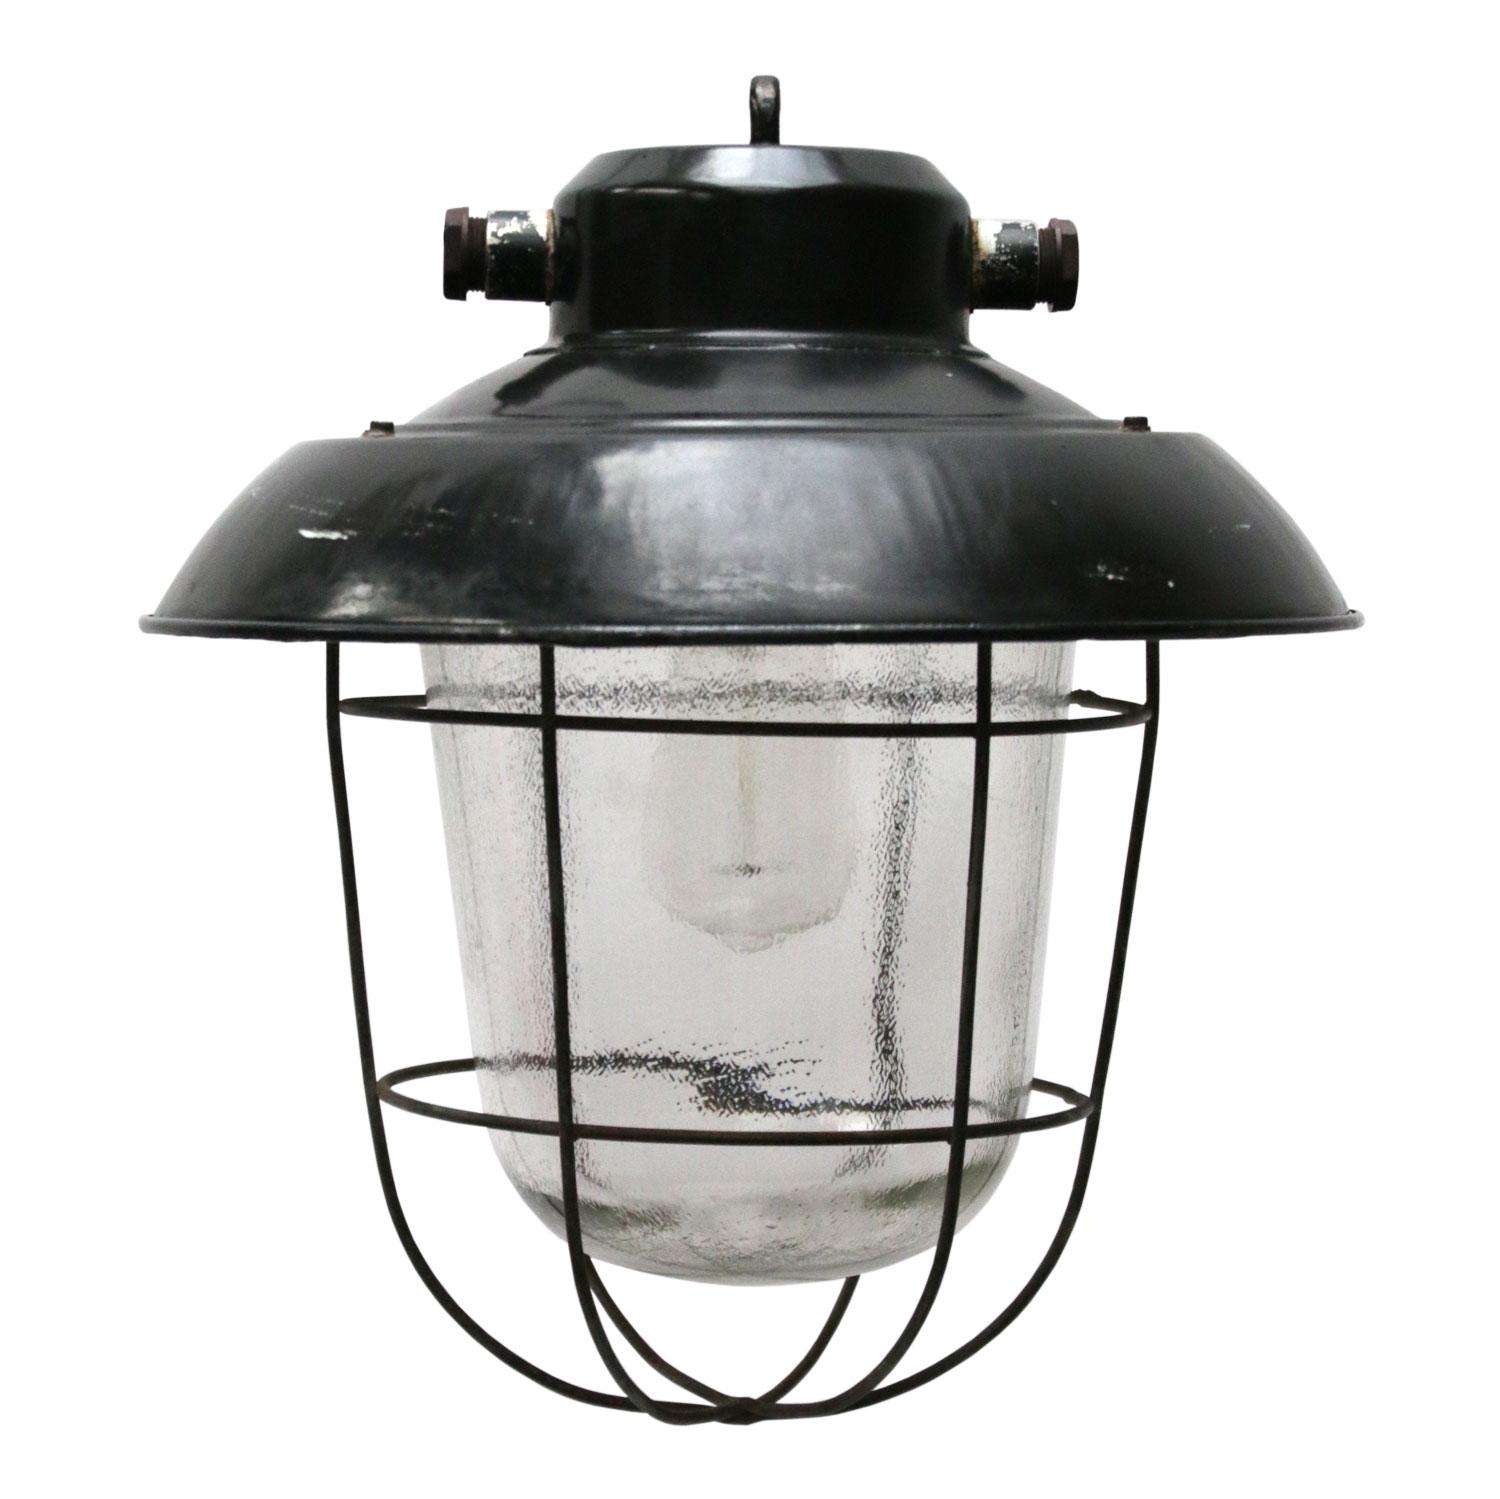 Black enamel industrial lamp. Clear Frosted glass.

Weight 3.0 kg / 6.6 lb. 

Priced per individual item. All lamps have been made suitable by international standards for incandescent light bulbs, energy-efficient and LED bulbs. E26/E27 bulb